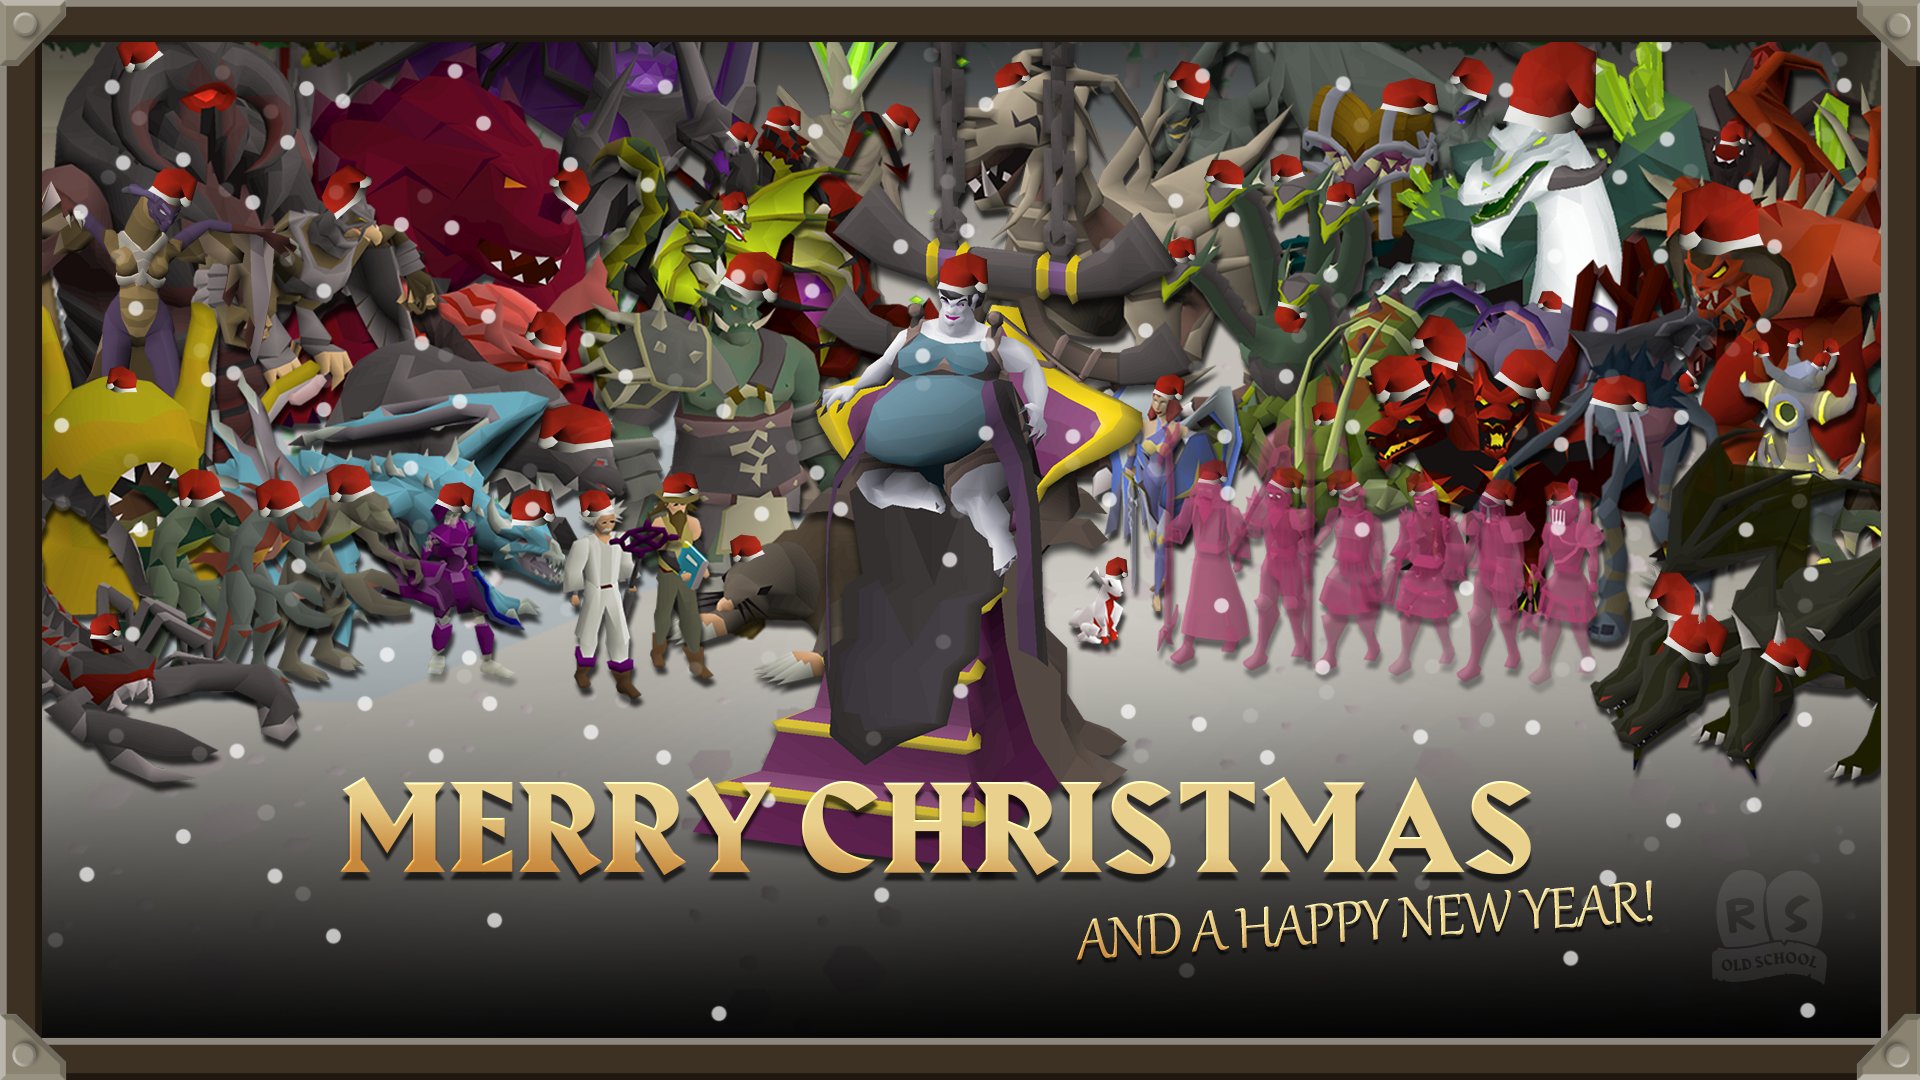 Osrs Christmas 2022 Old School Runescape On Twitter: "🎄 Merry Christmas And A Happy New Year To All! 🏆Thank You For All Of Your Support This Year, We Can't Wait To Get Started Again In